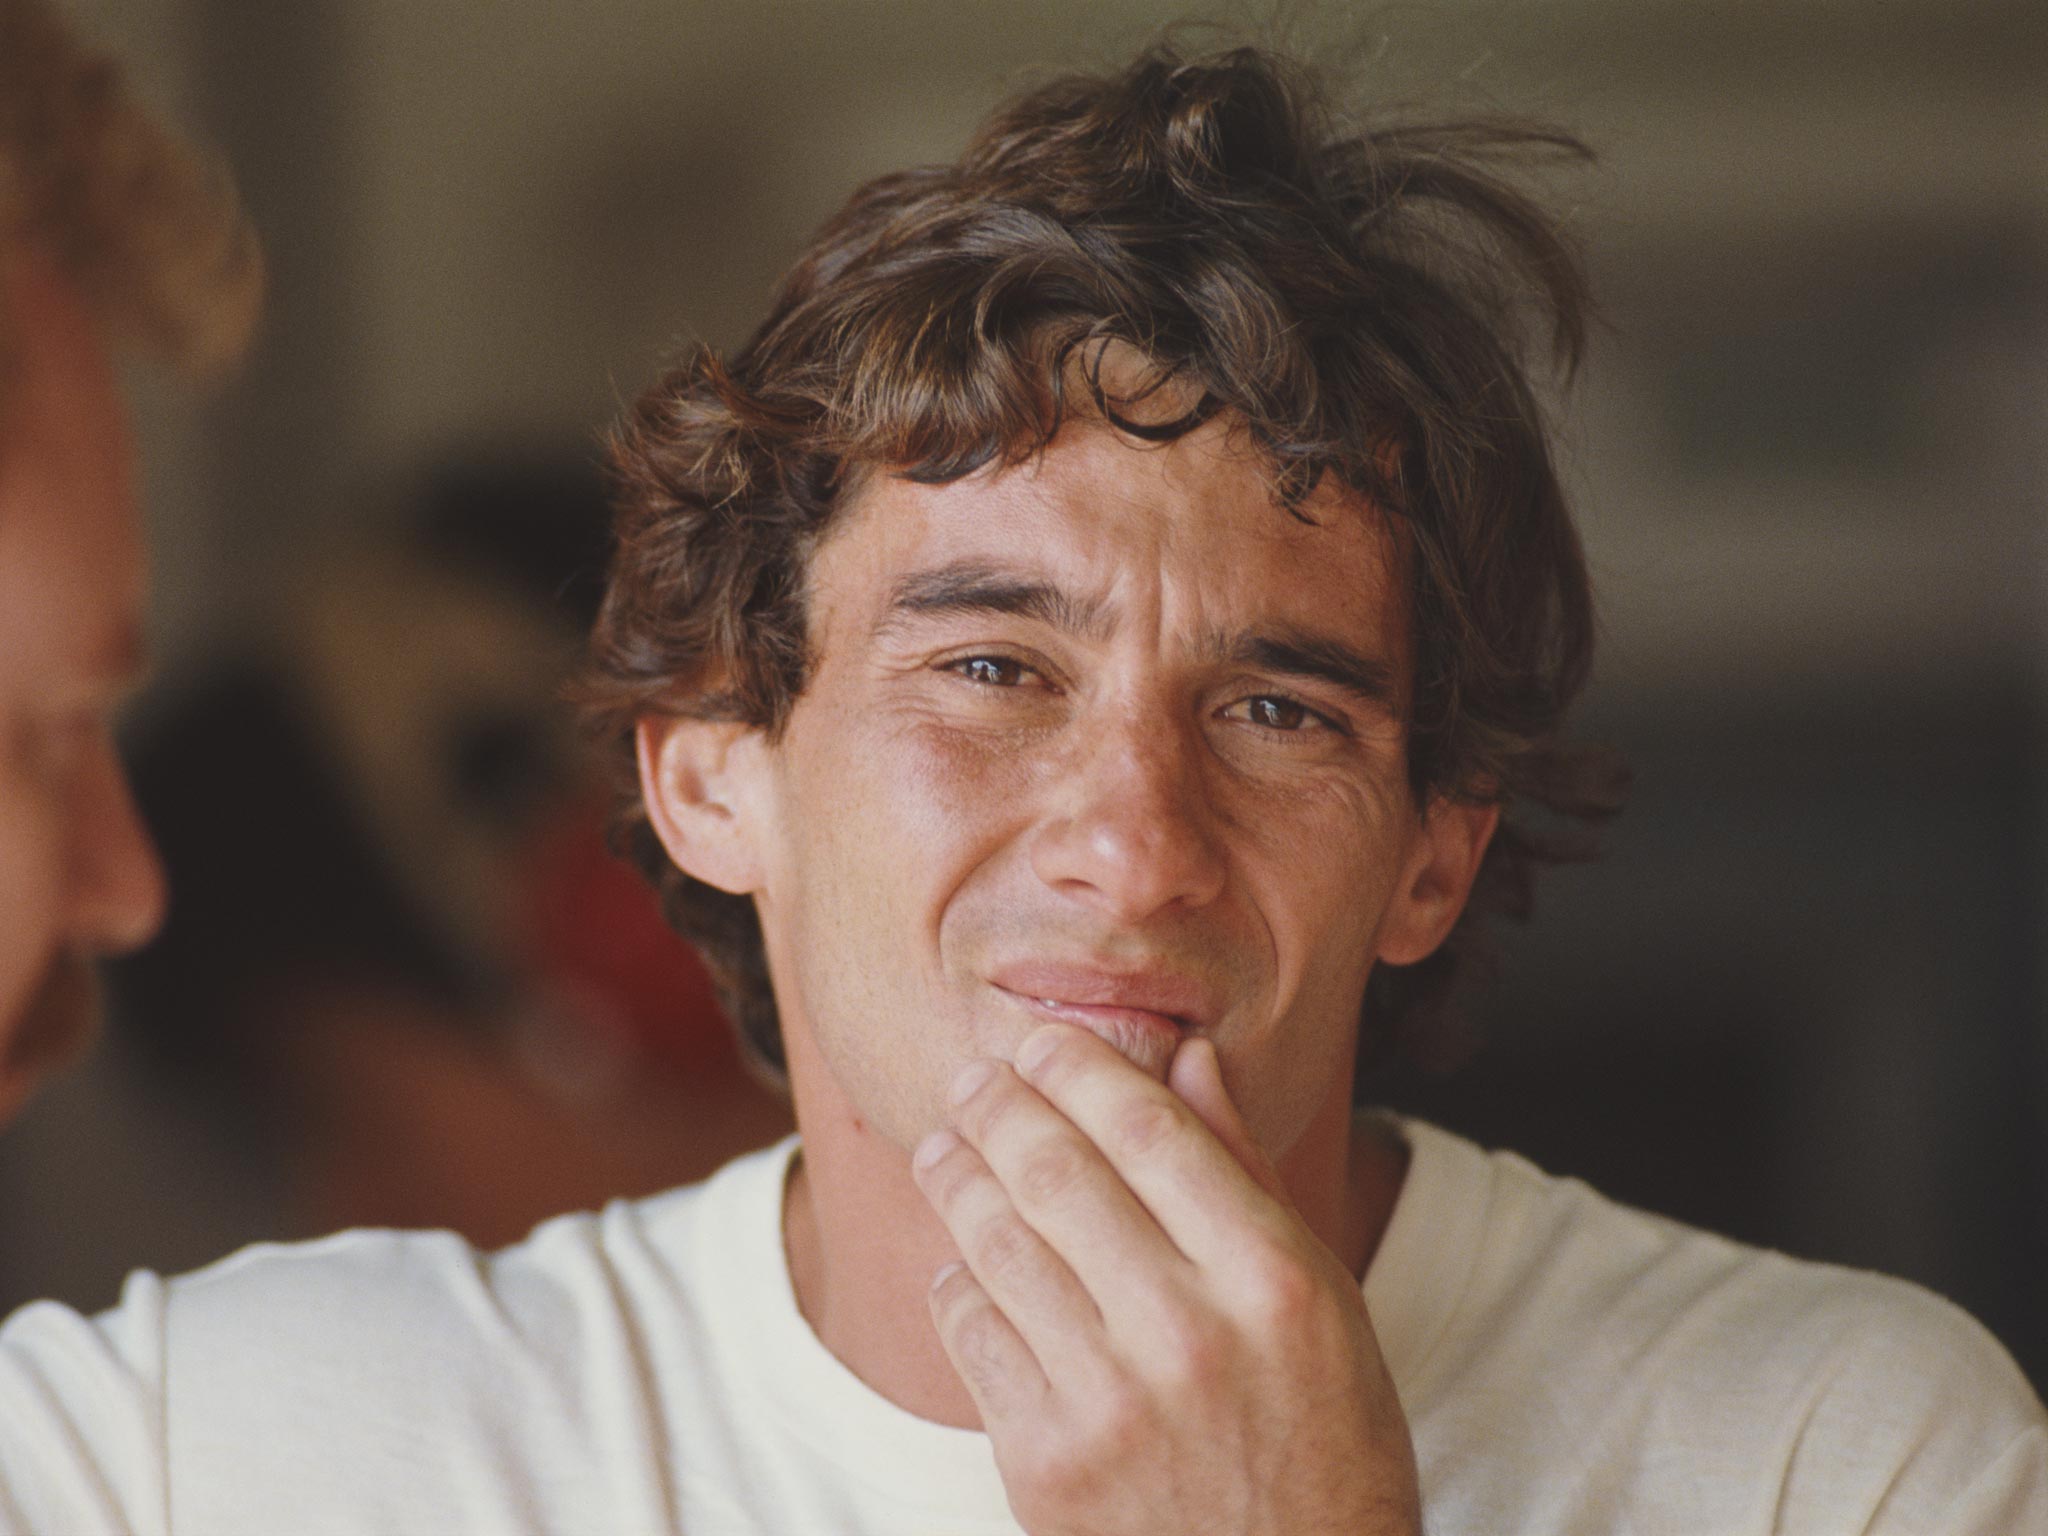 Ayrton Senna inspired a generation of drivers, including Lewis Hamilton